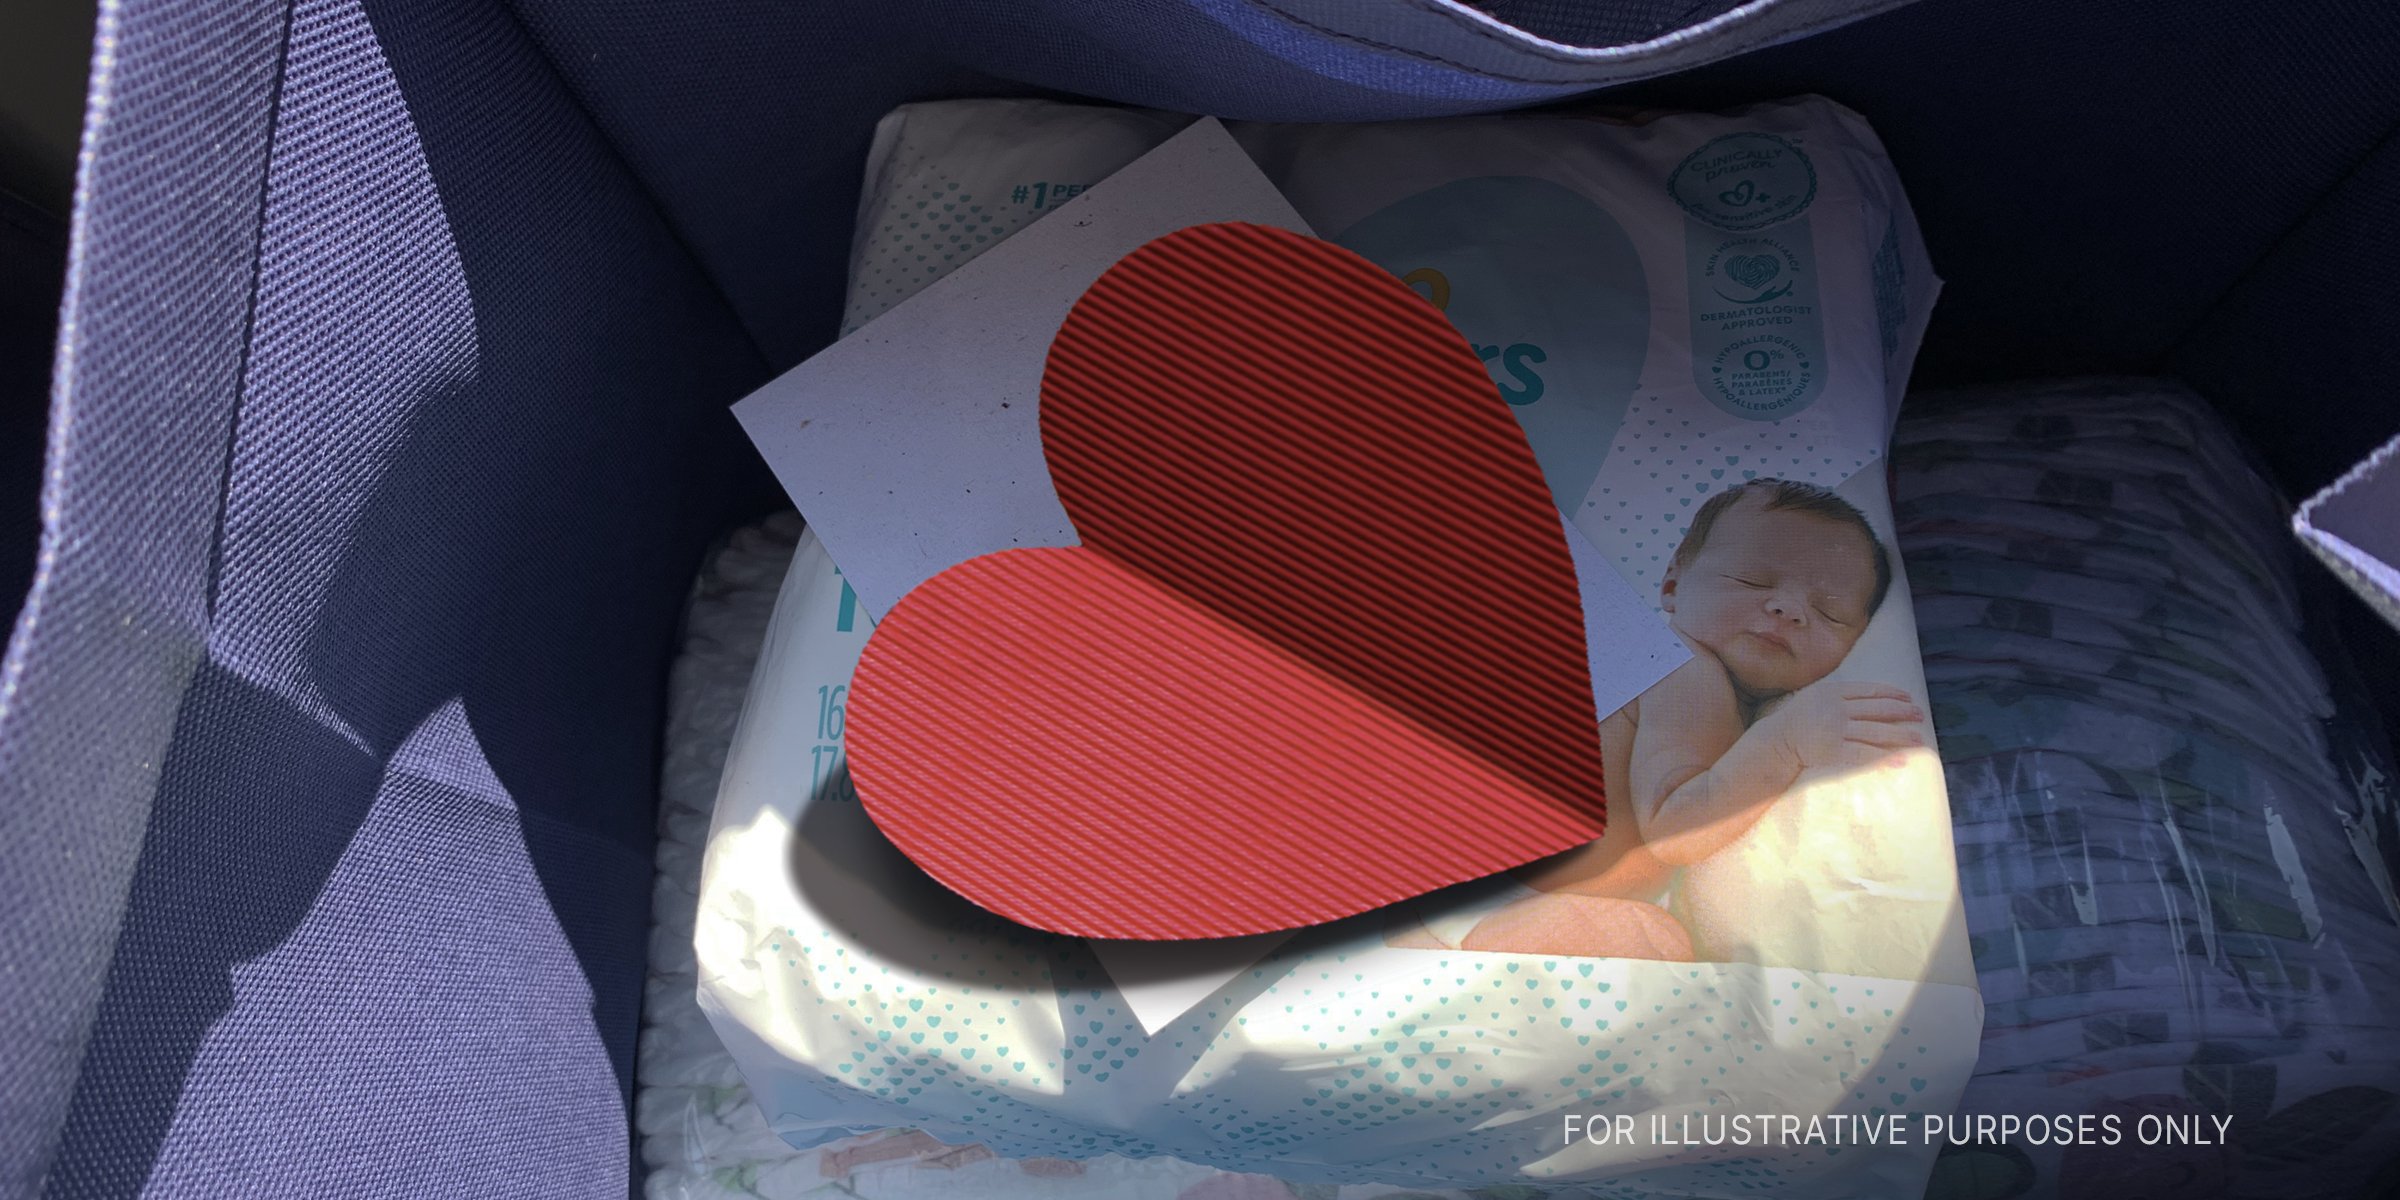 Heart-shaped note on pack of diapers | Source: Shutterstock Flickr / milwaukeeva (Public Domain) 